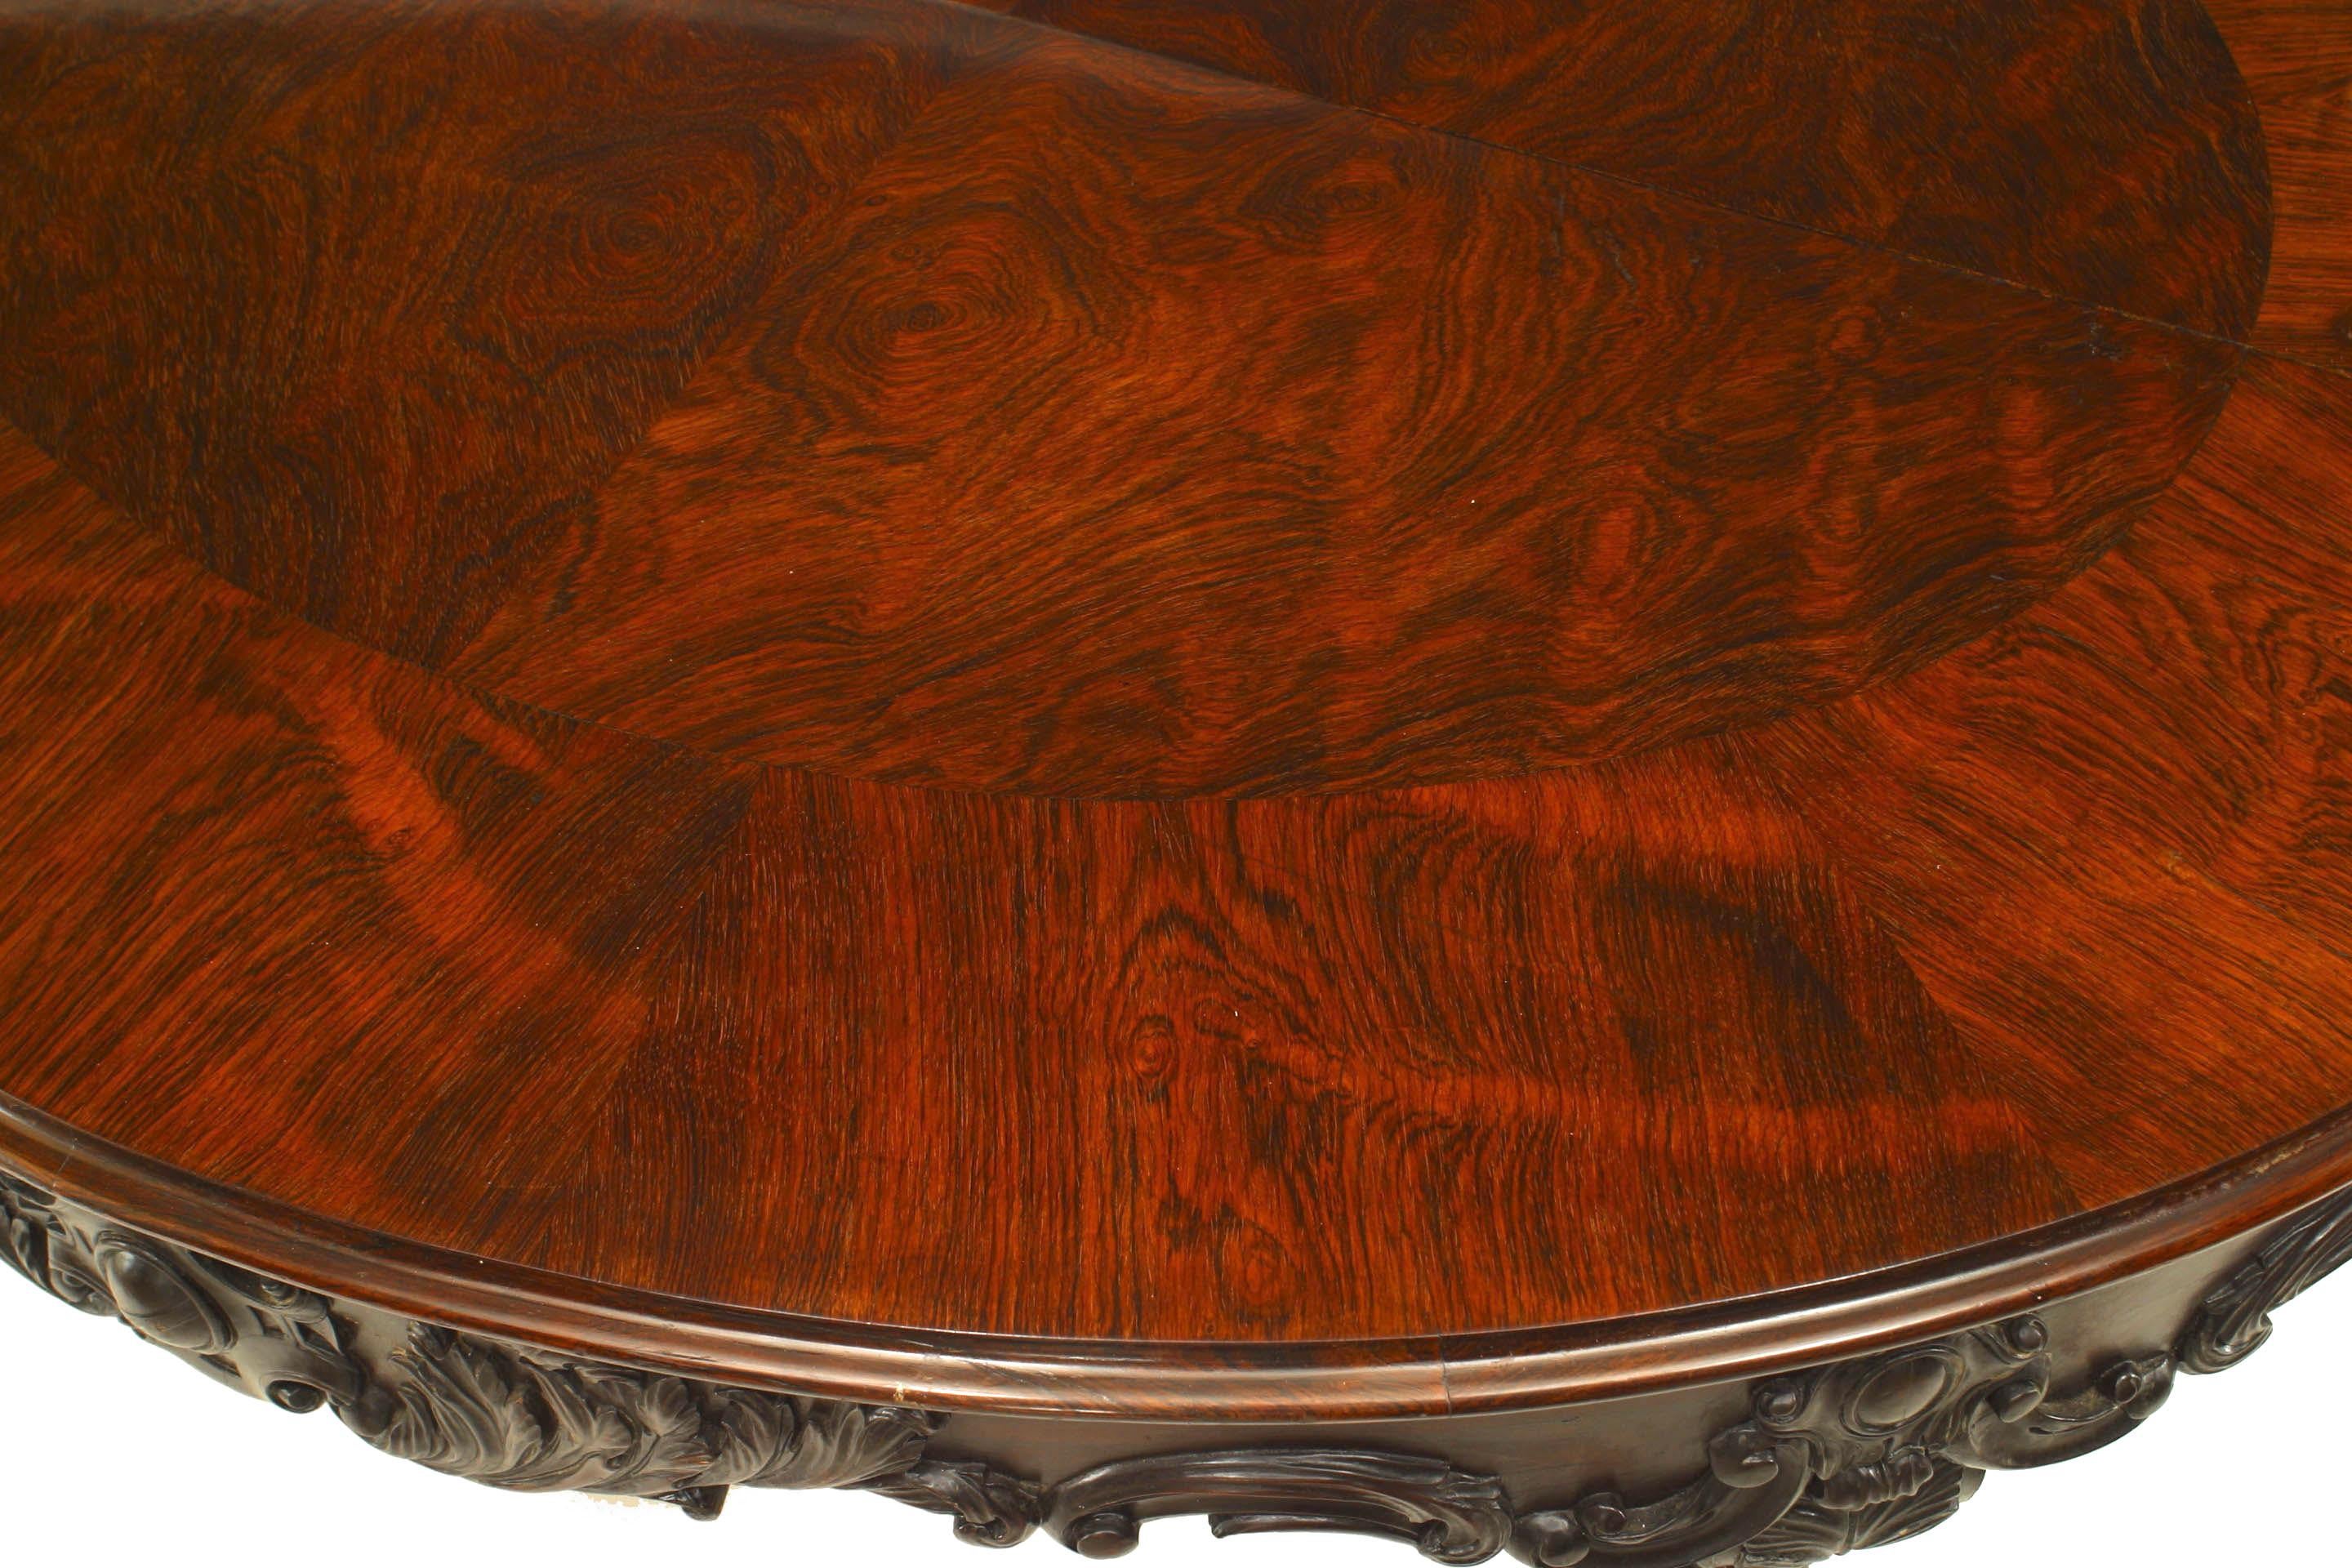 American Victorian rosewood oval center table with carved stretcher centered with urn (attributed to ALEXANDER ROUX).
